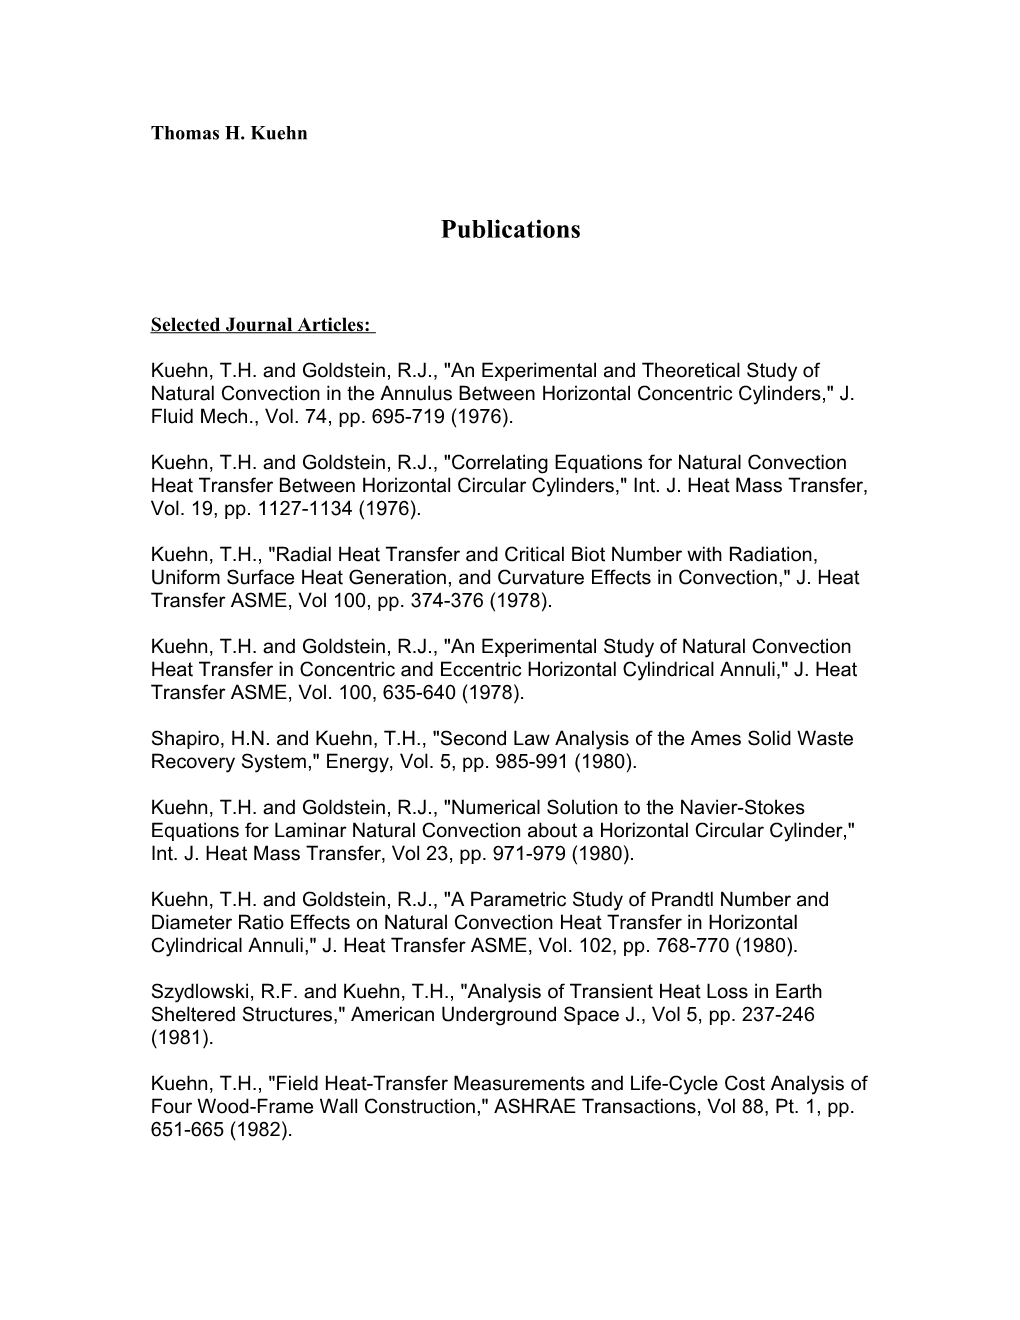 Selected Journal Articles